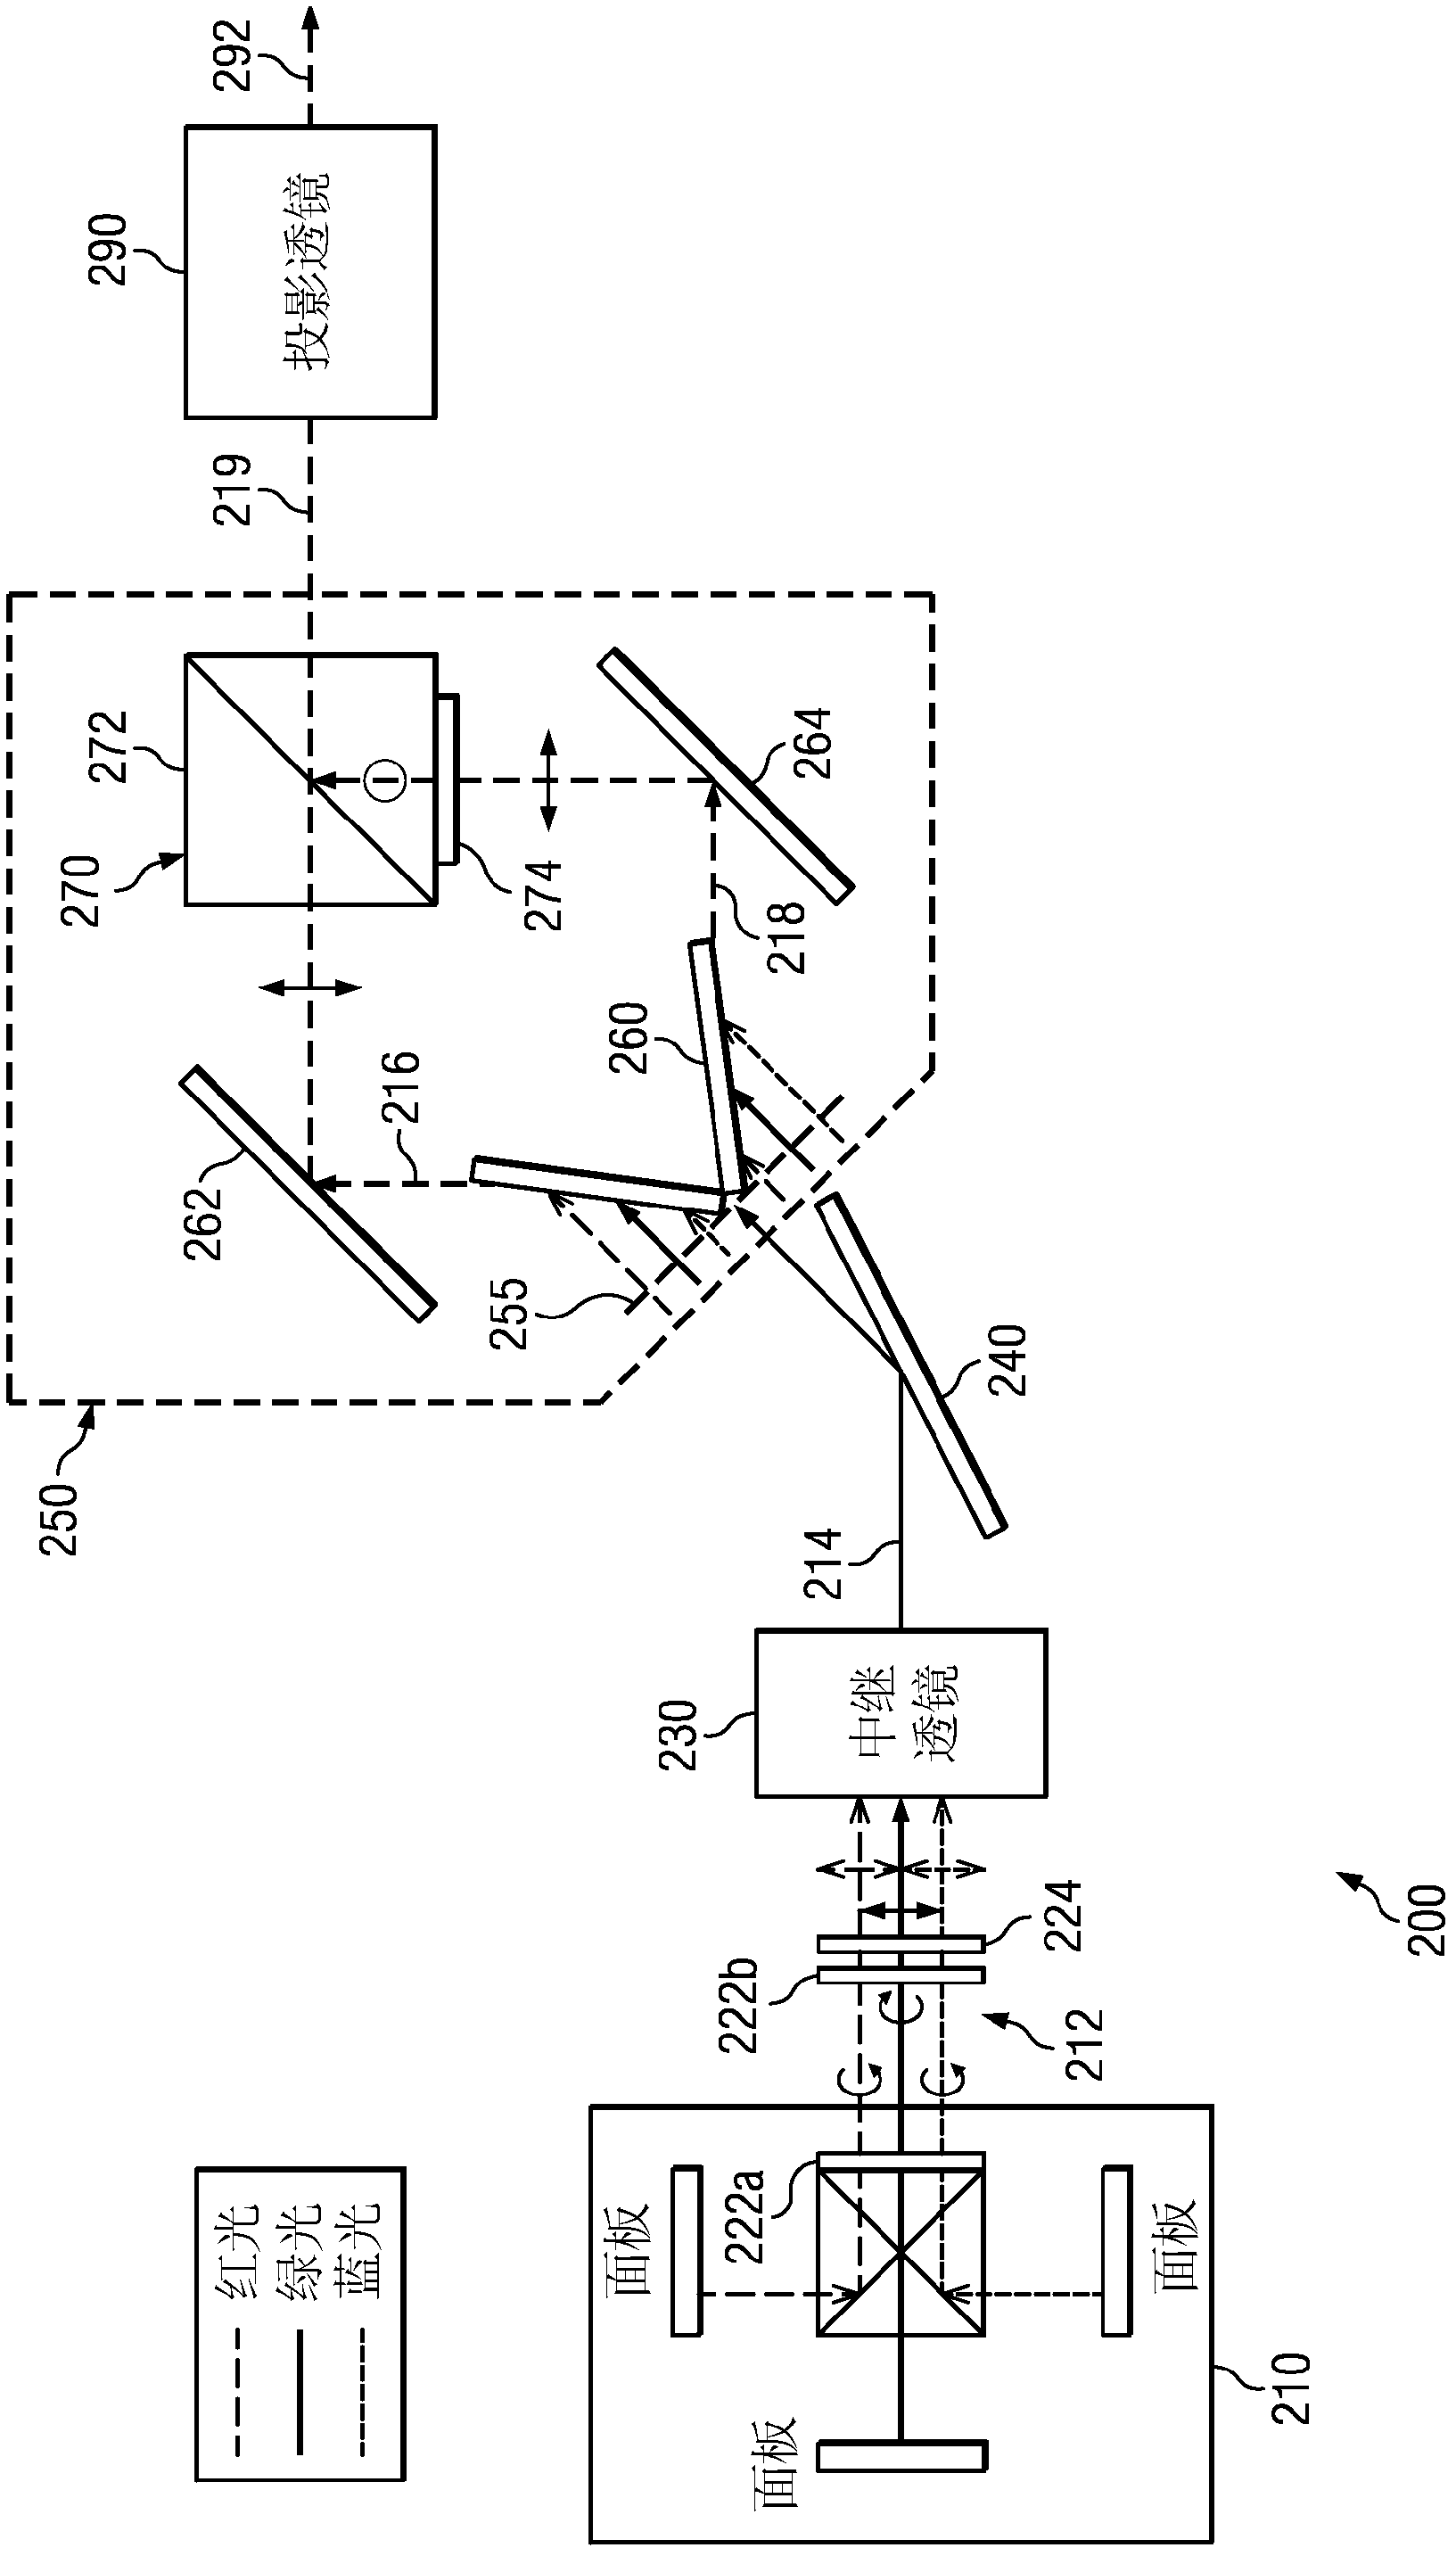 Stereoscopic projection system employing spatial multiplexing at an intermediate image plane